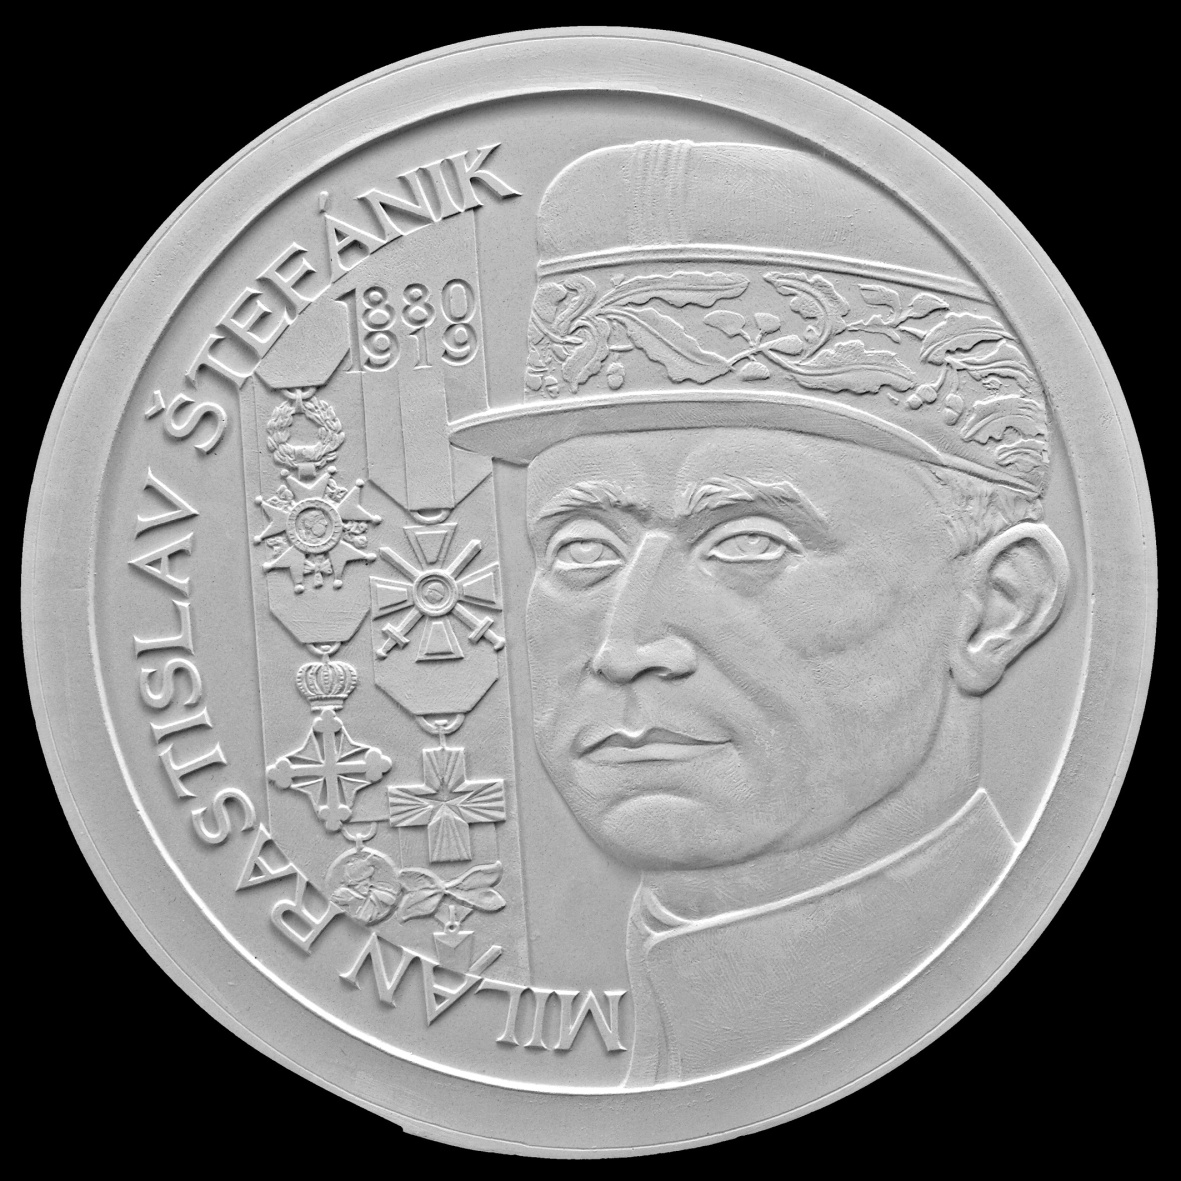 Increased third prize and the design selected for the coin’s obverse